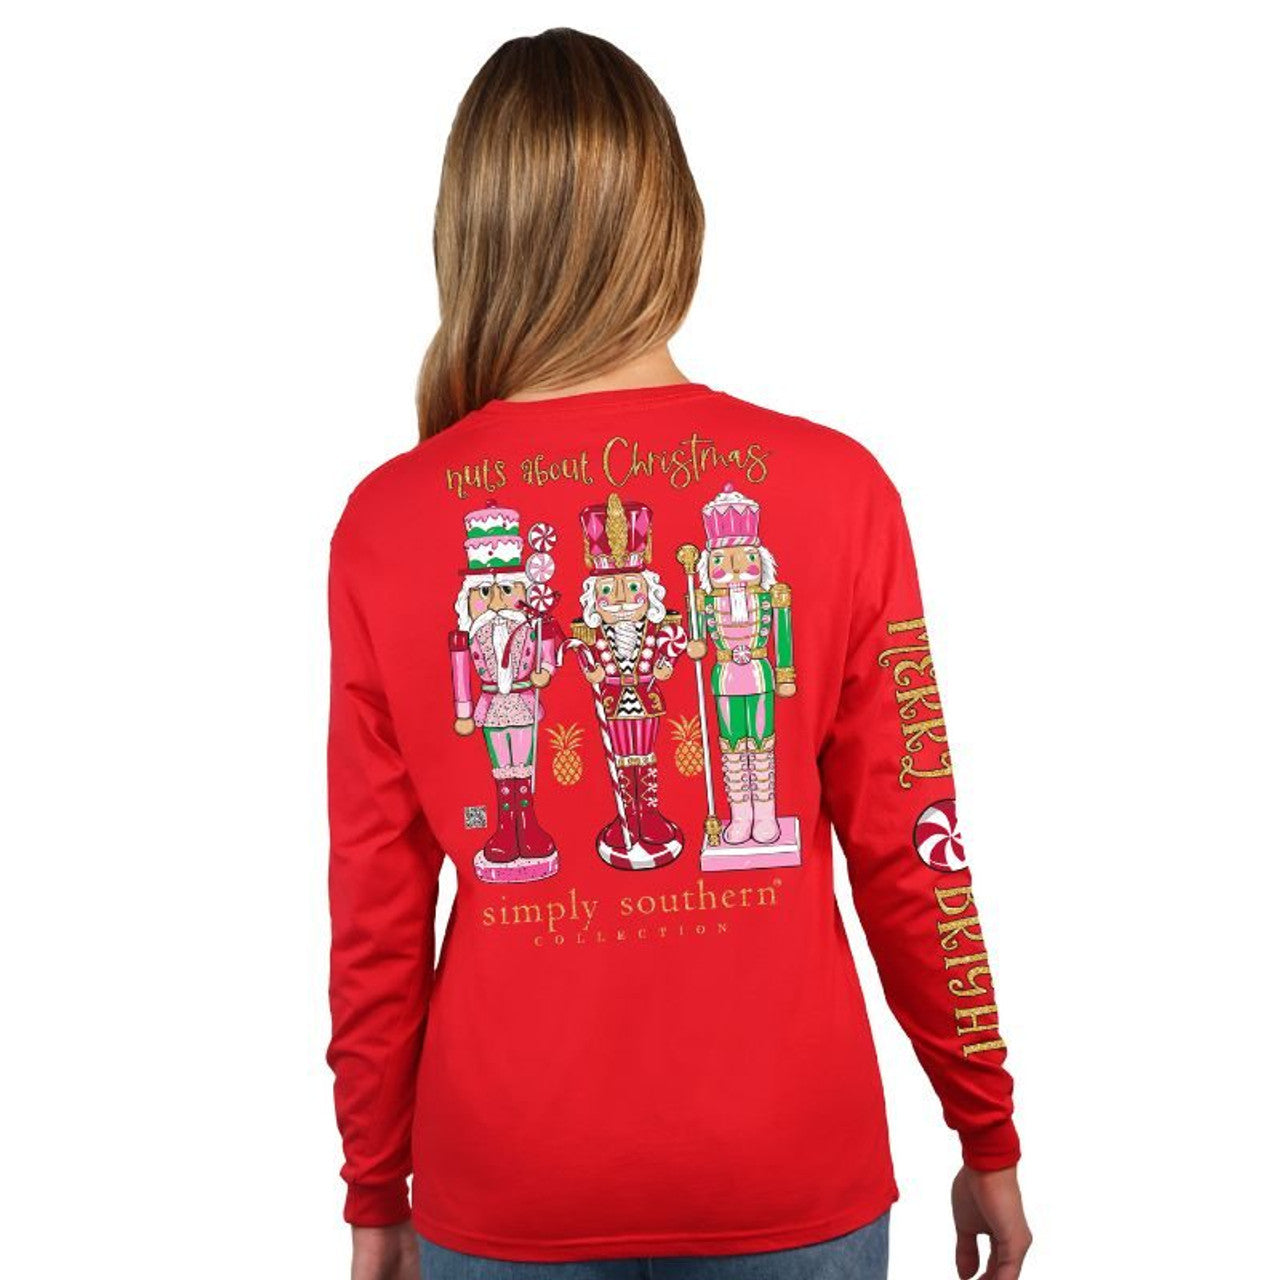 FINAL SALE - Simply Southern - Nuts About Christmas Long Sleeve Tee